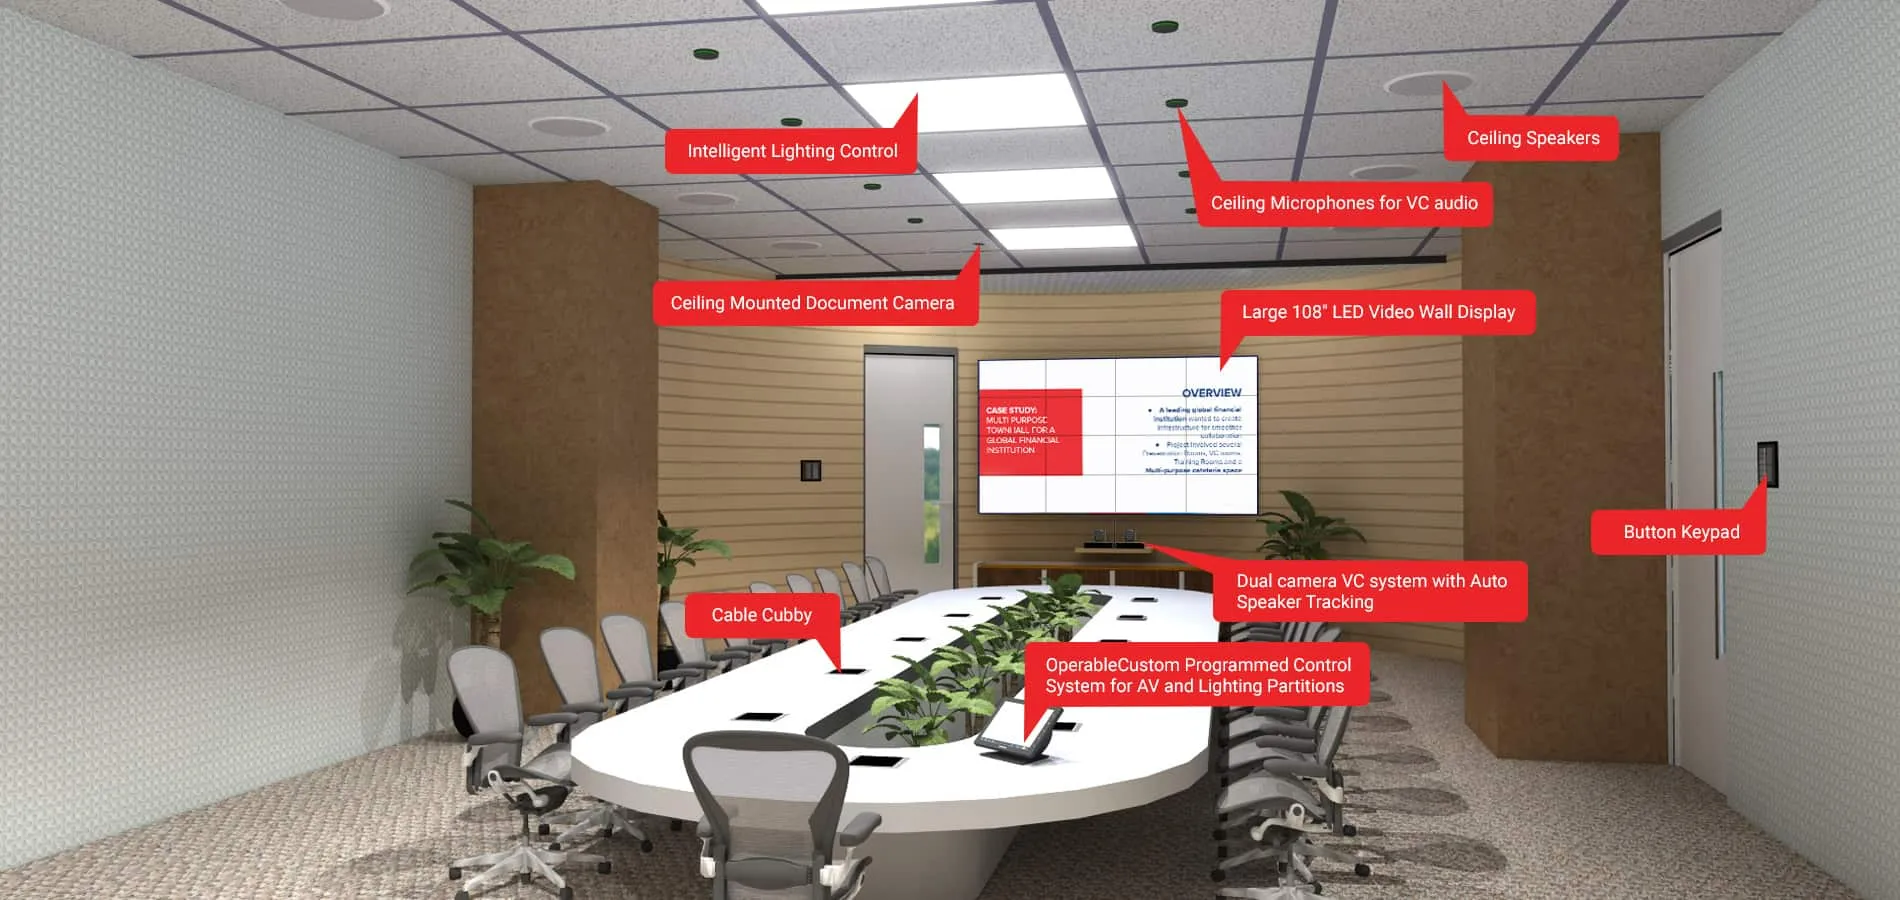 2l seater MD's Boardroom - with support for VC enabled collaboration